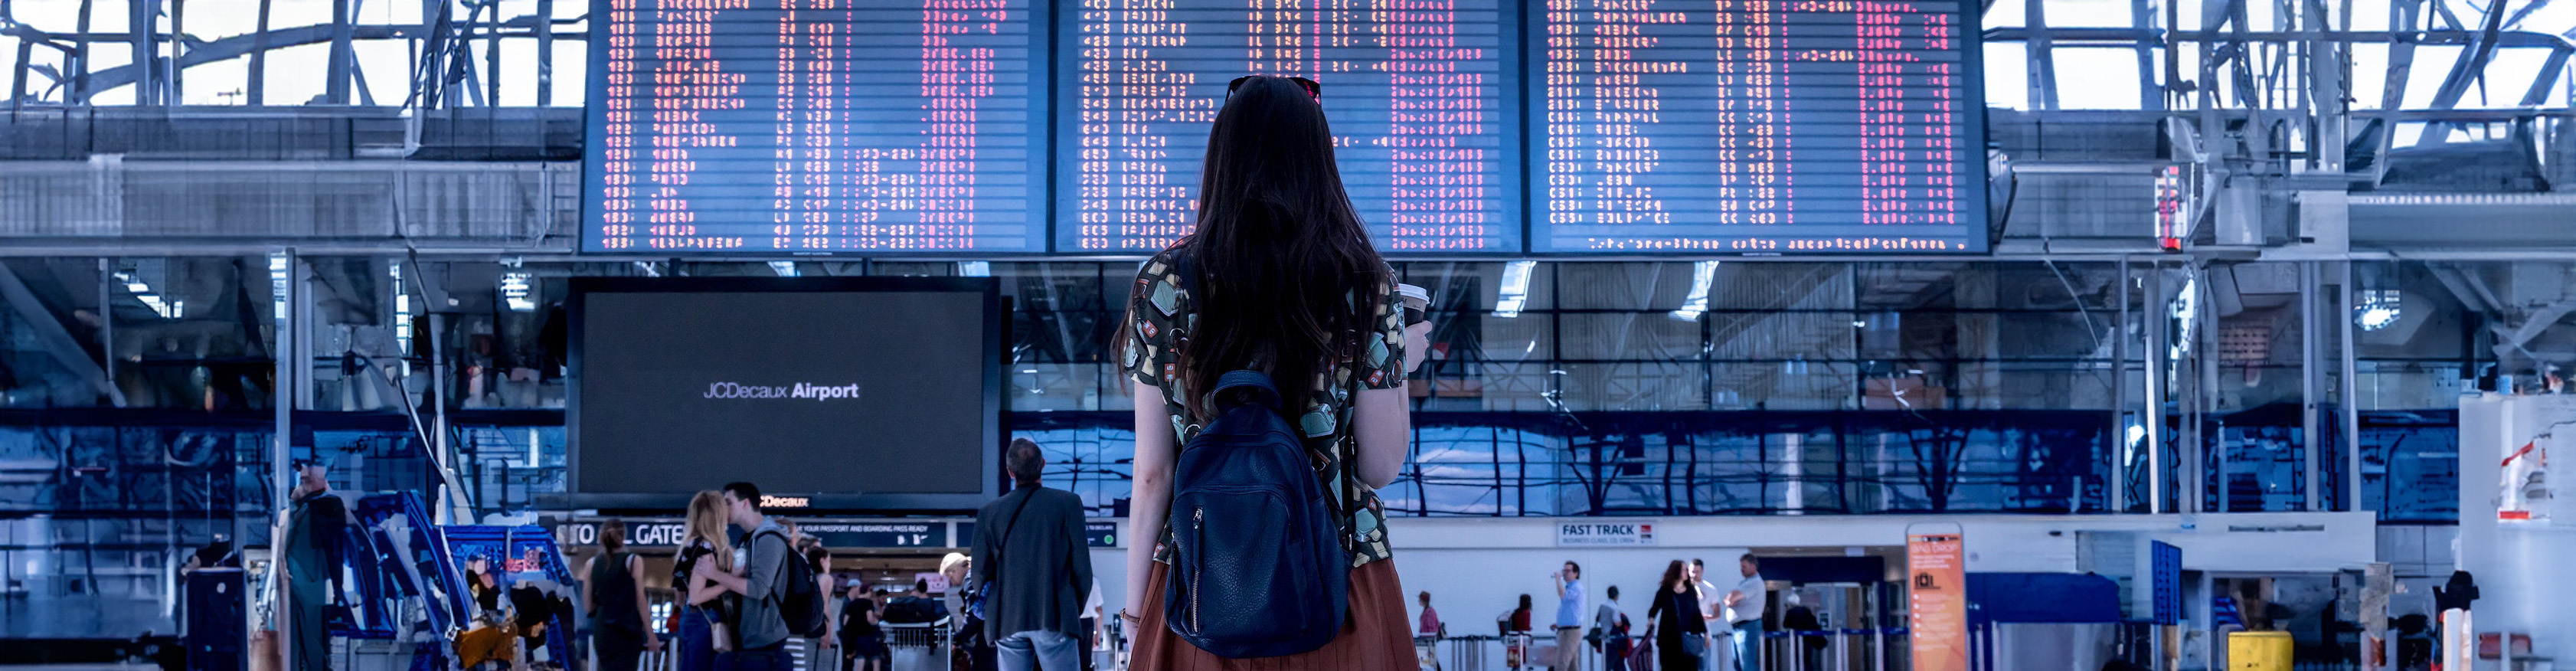 girl looking at airport terminal arrivals board